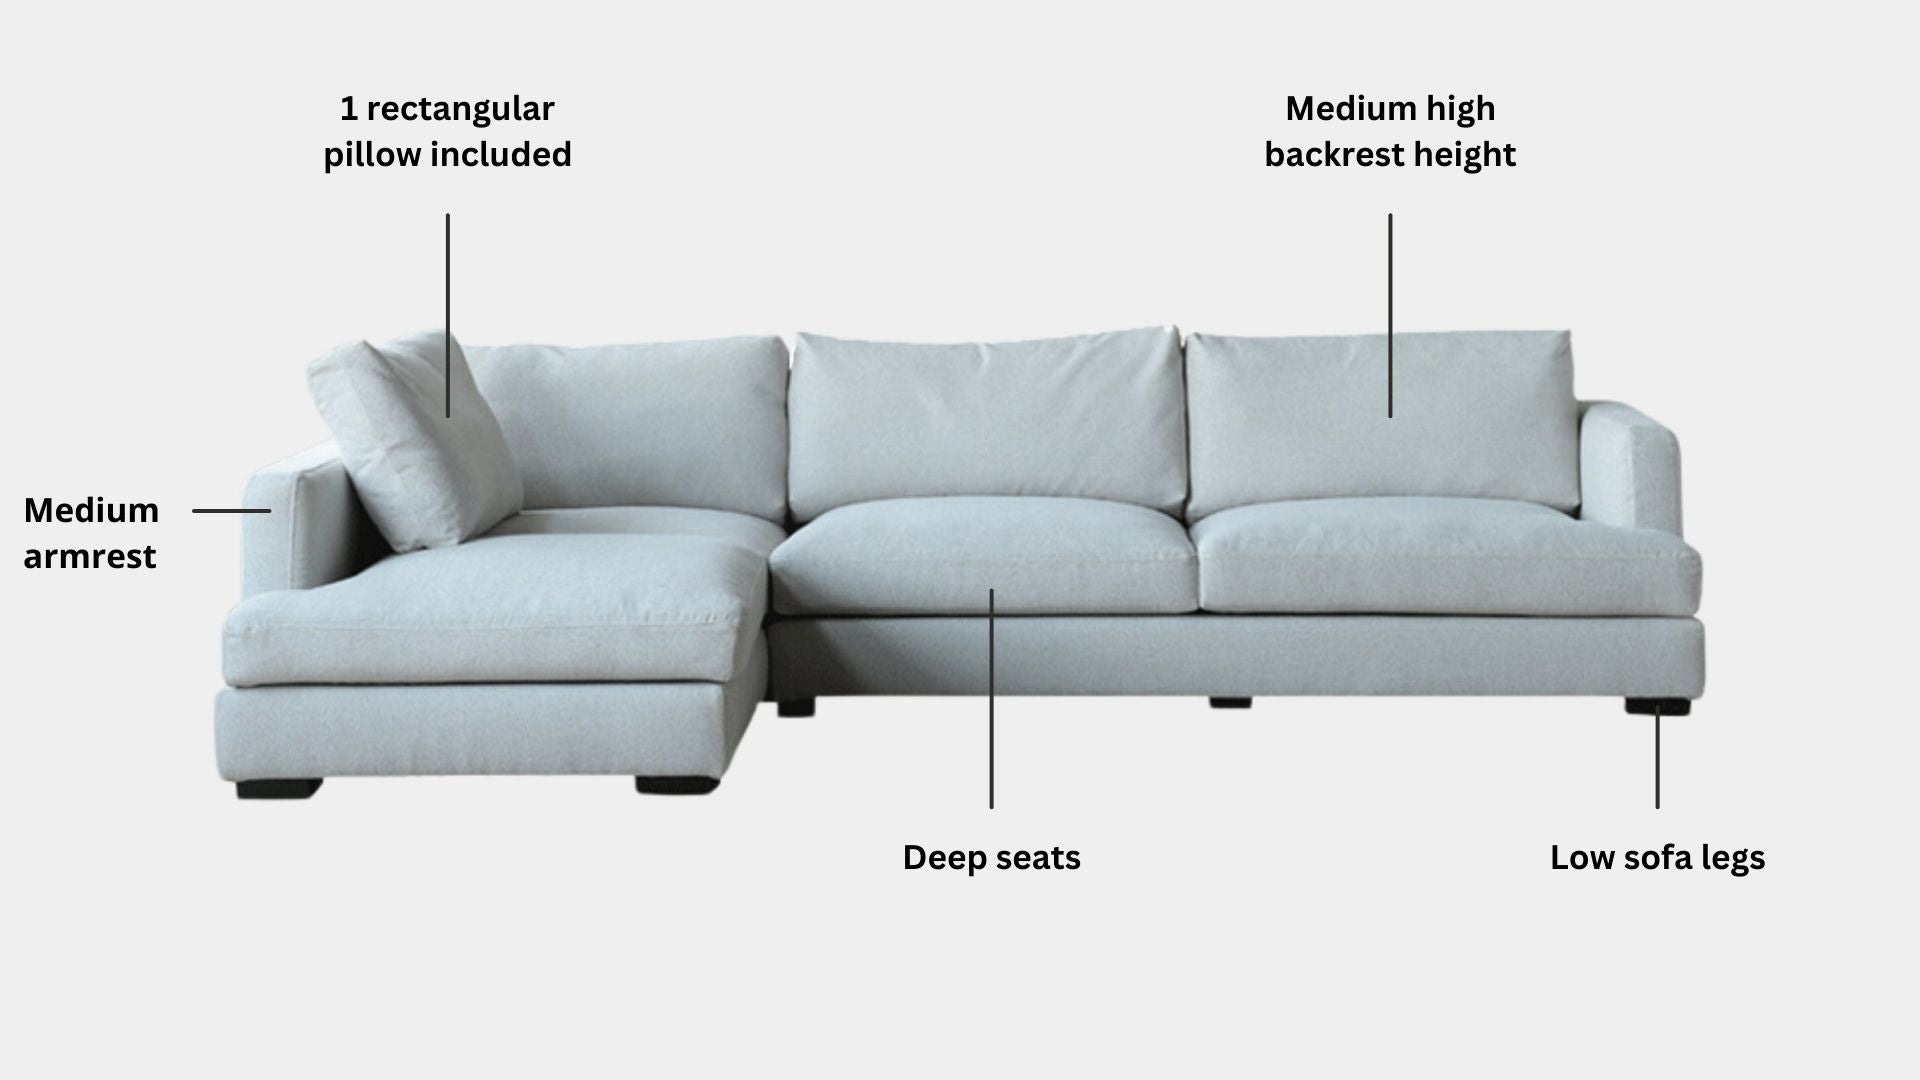 Key features such as armrest thickness, cushion height, seat depth and sofa leg height for Crescent Fabric Sectional Sofa